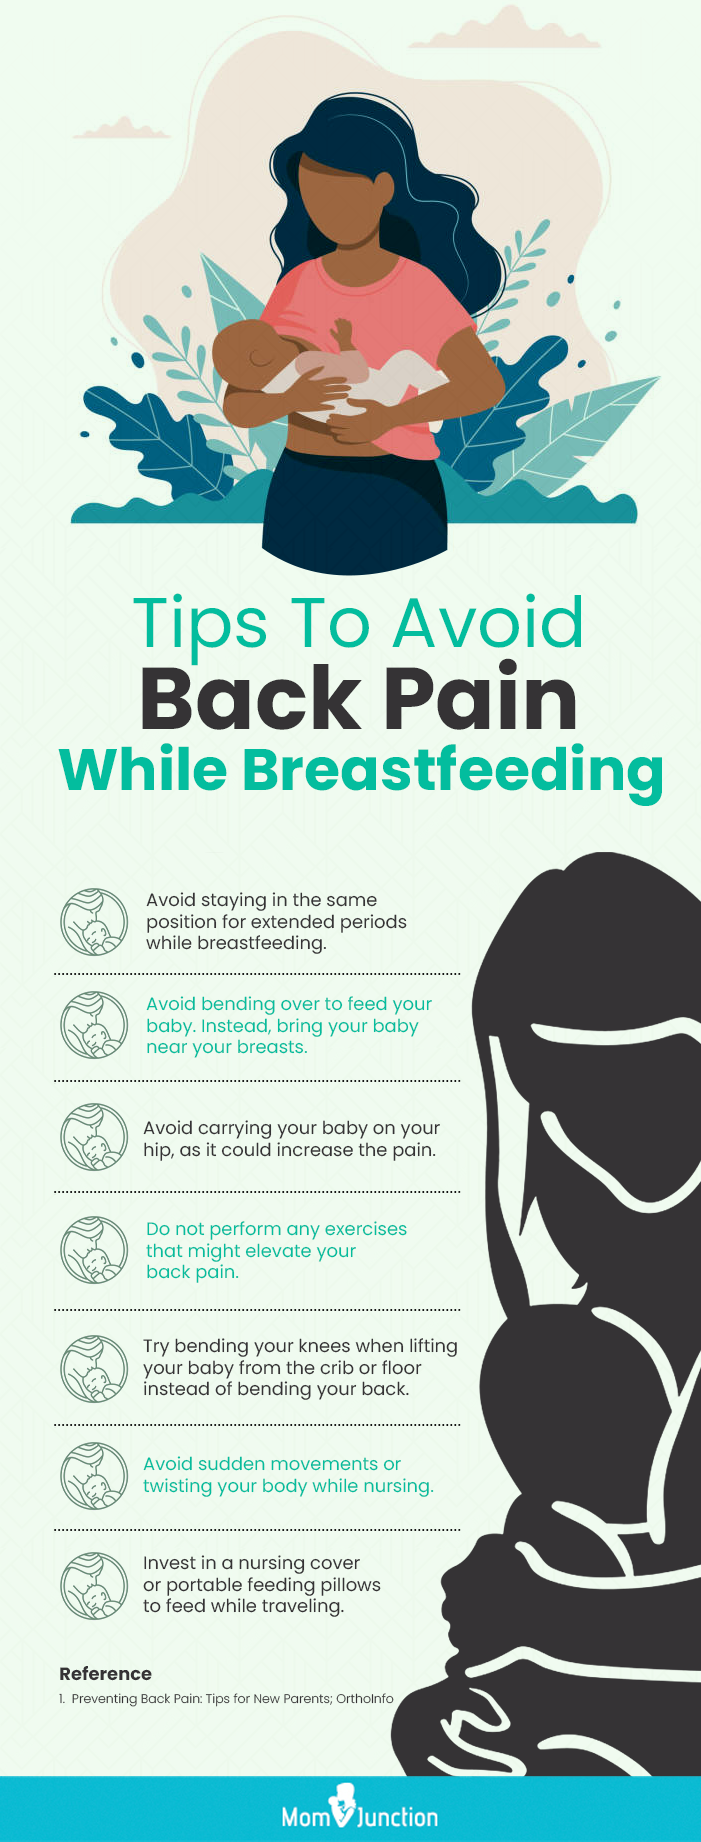 12 Tips for Breastfeeding Pain Relief Now - For Modern Kids